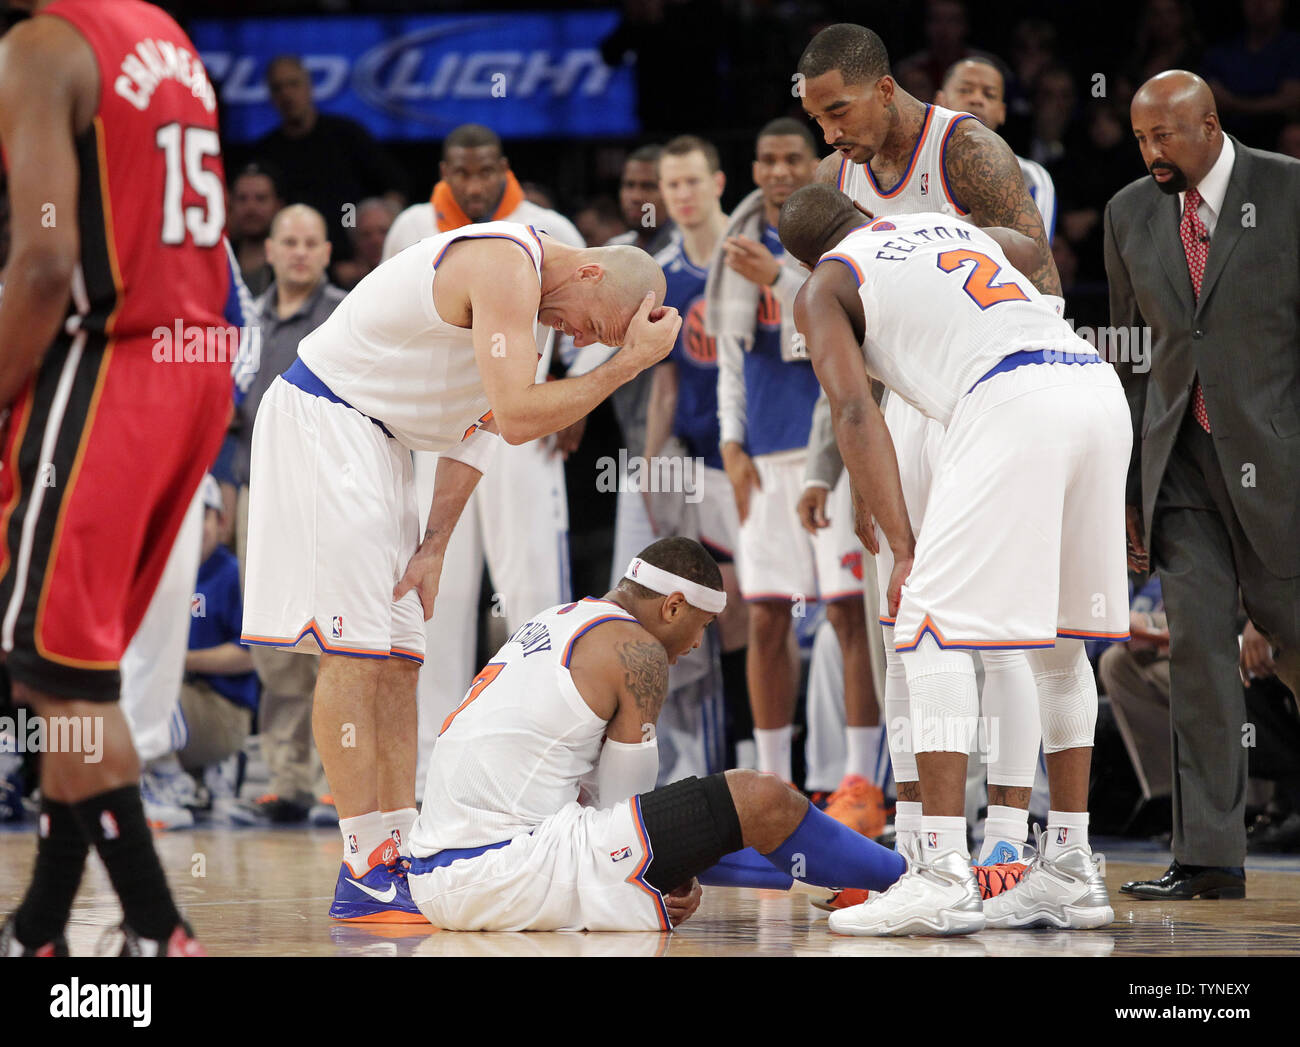 New York Knicks Jason Kidd, J.R. Smith, Raymond Felton and head coach Mike Woodson watch Carmelo Anthony sit on the court after he makes contact with a player from the Miami Heat while shooting a jump shot at Madison Square Garden in New York City on March 3, 2013. The Heat rallied from 16 down to overtake the Knicks 99-93 and match a franchise mark of 14 straight wins.  UPI/John Angelillo Stock Photo